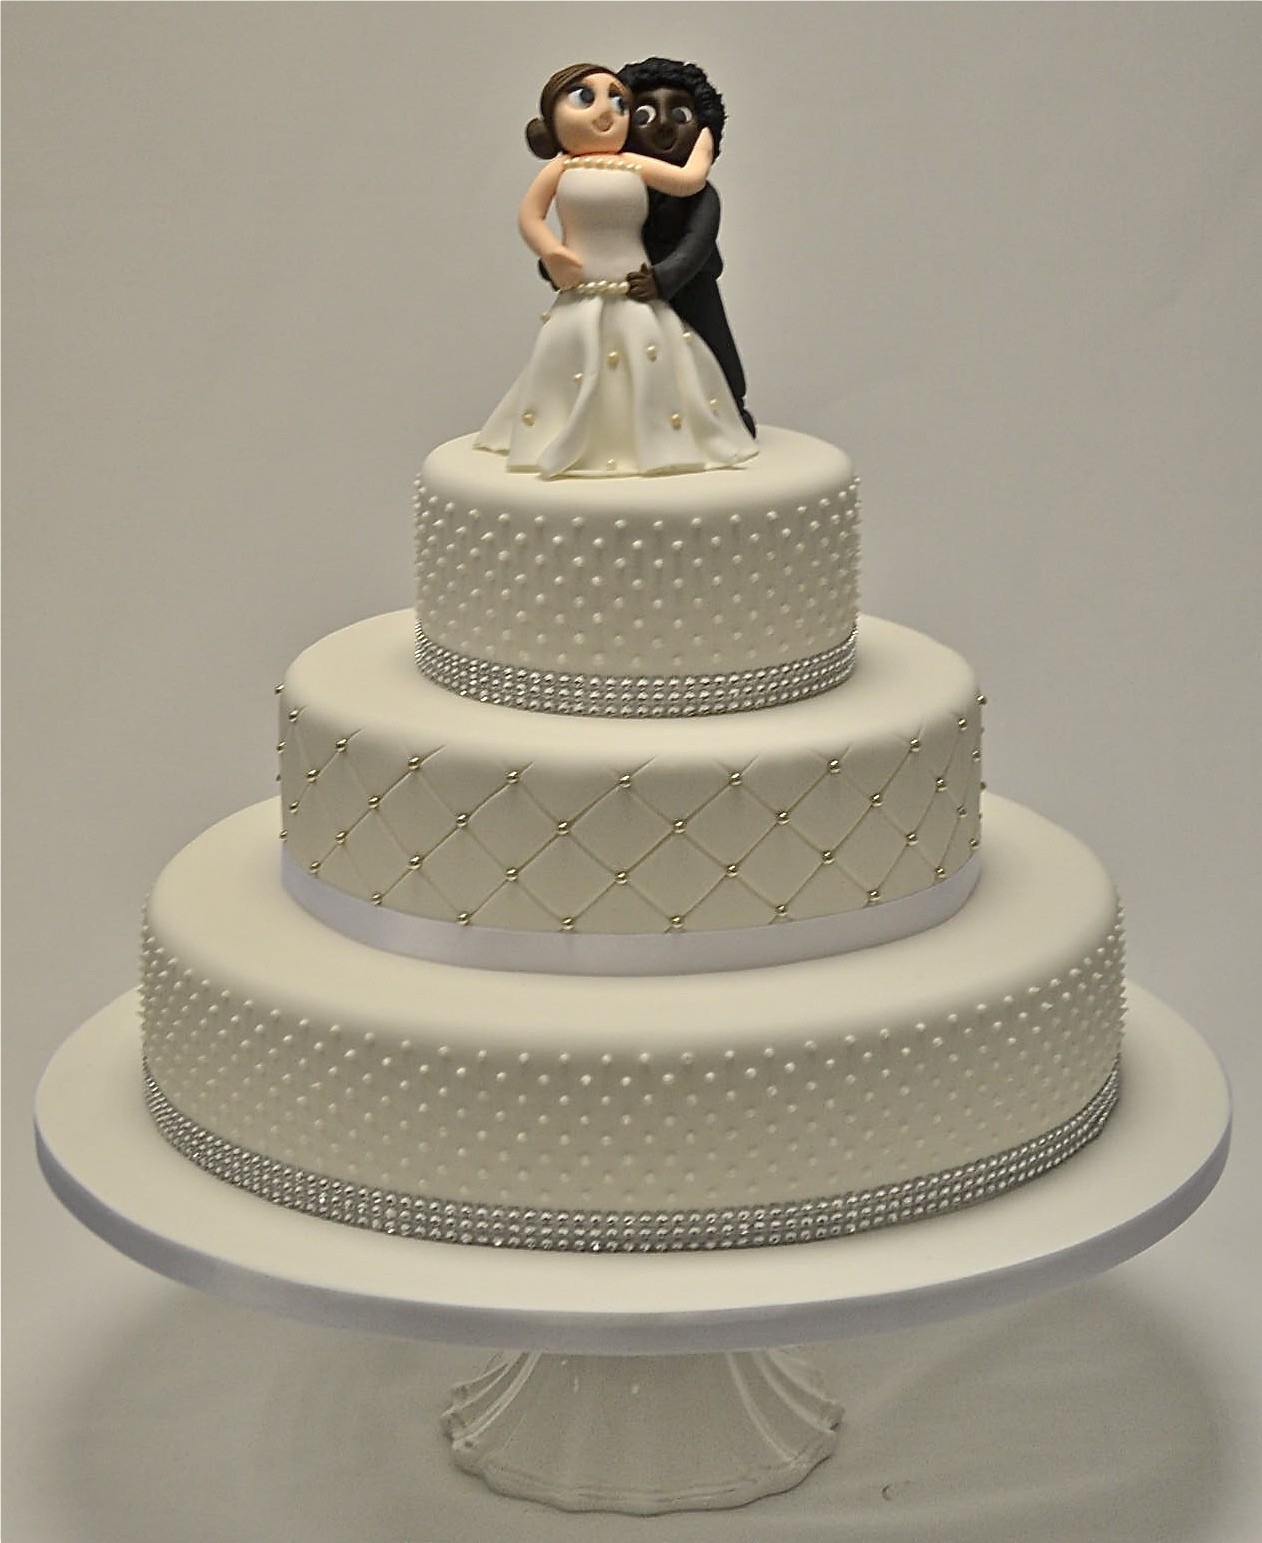 3 Tier Wedding Cakes Pictures
 3 Tier Piped Dots and Diamante Wedding Cake Wedding